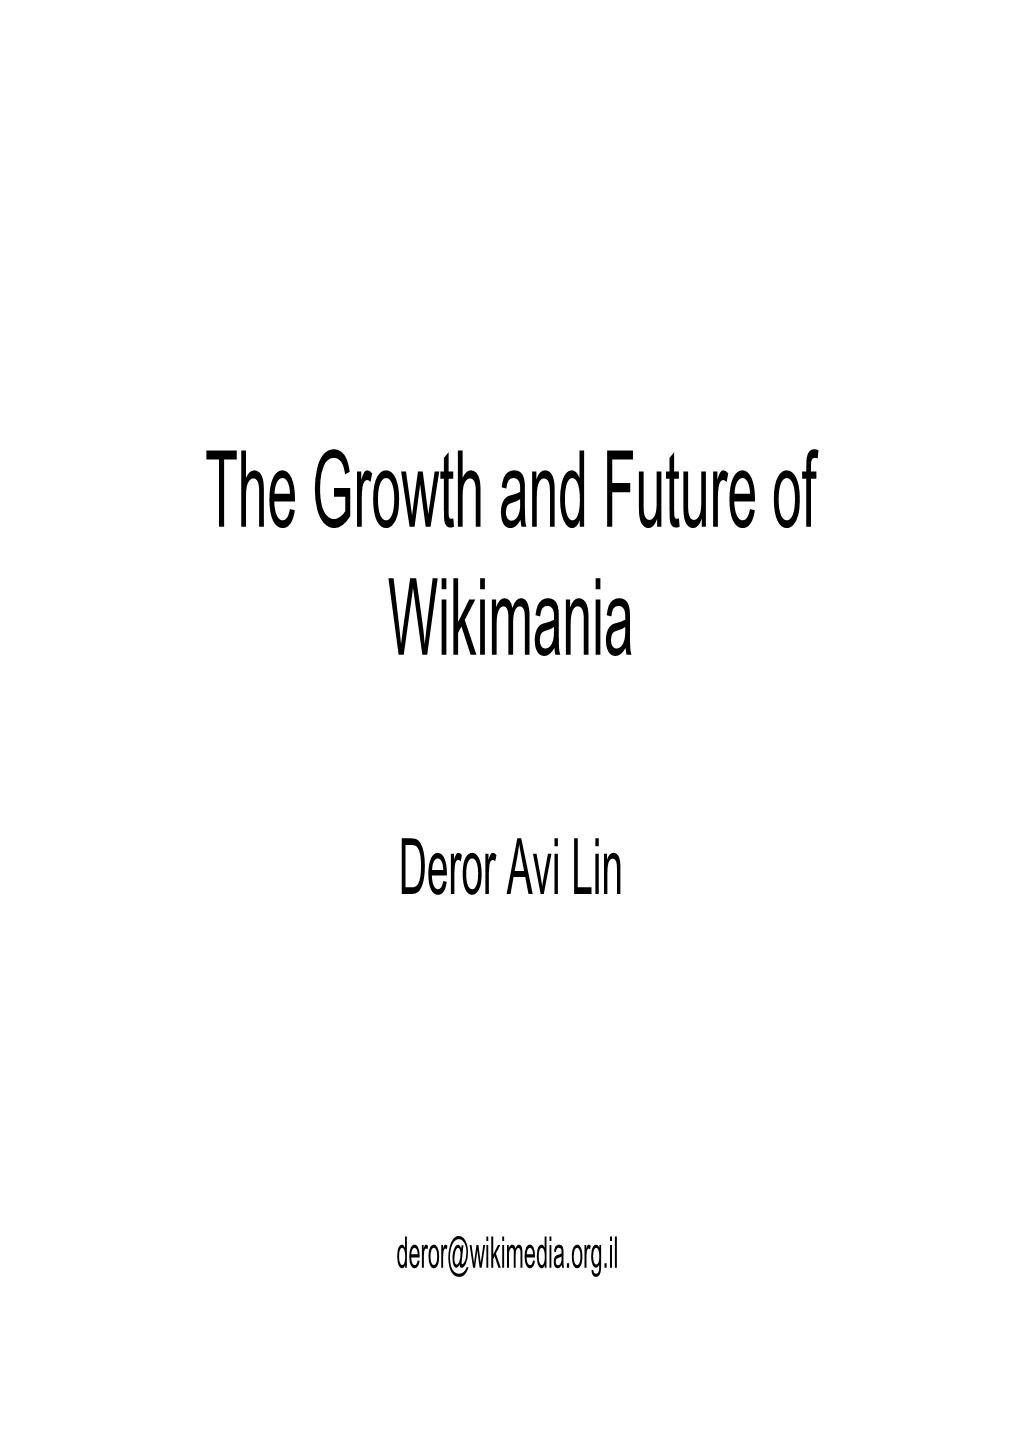 The Growth and Future of Wikimania